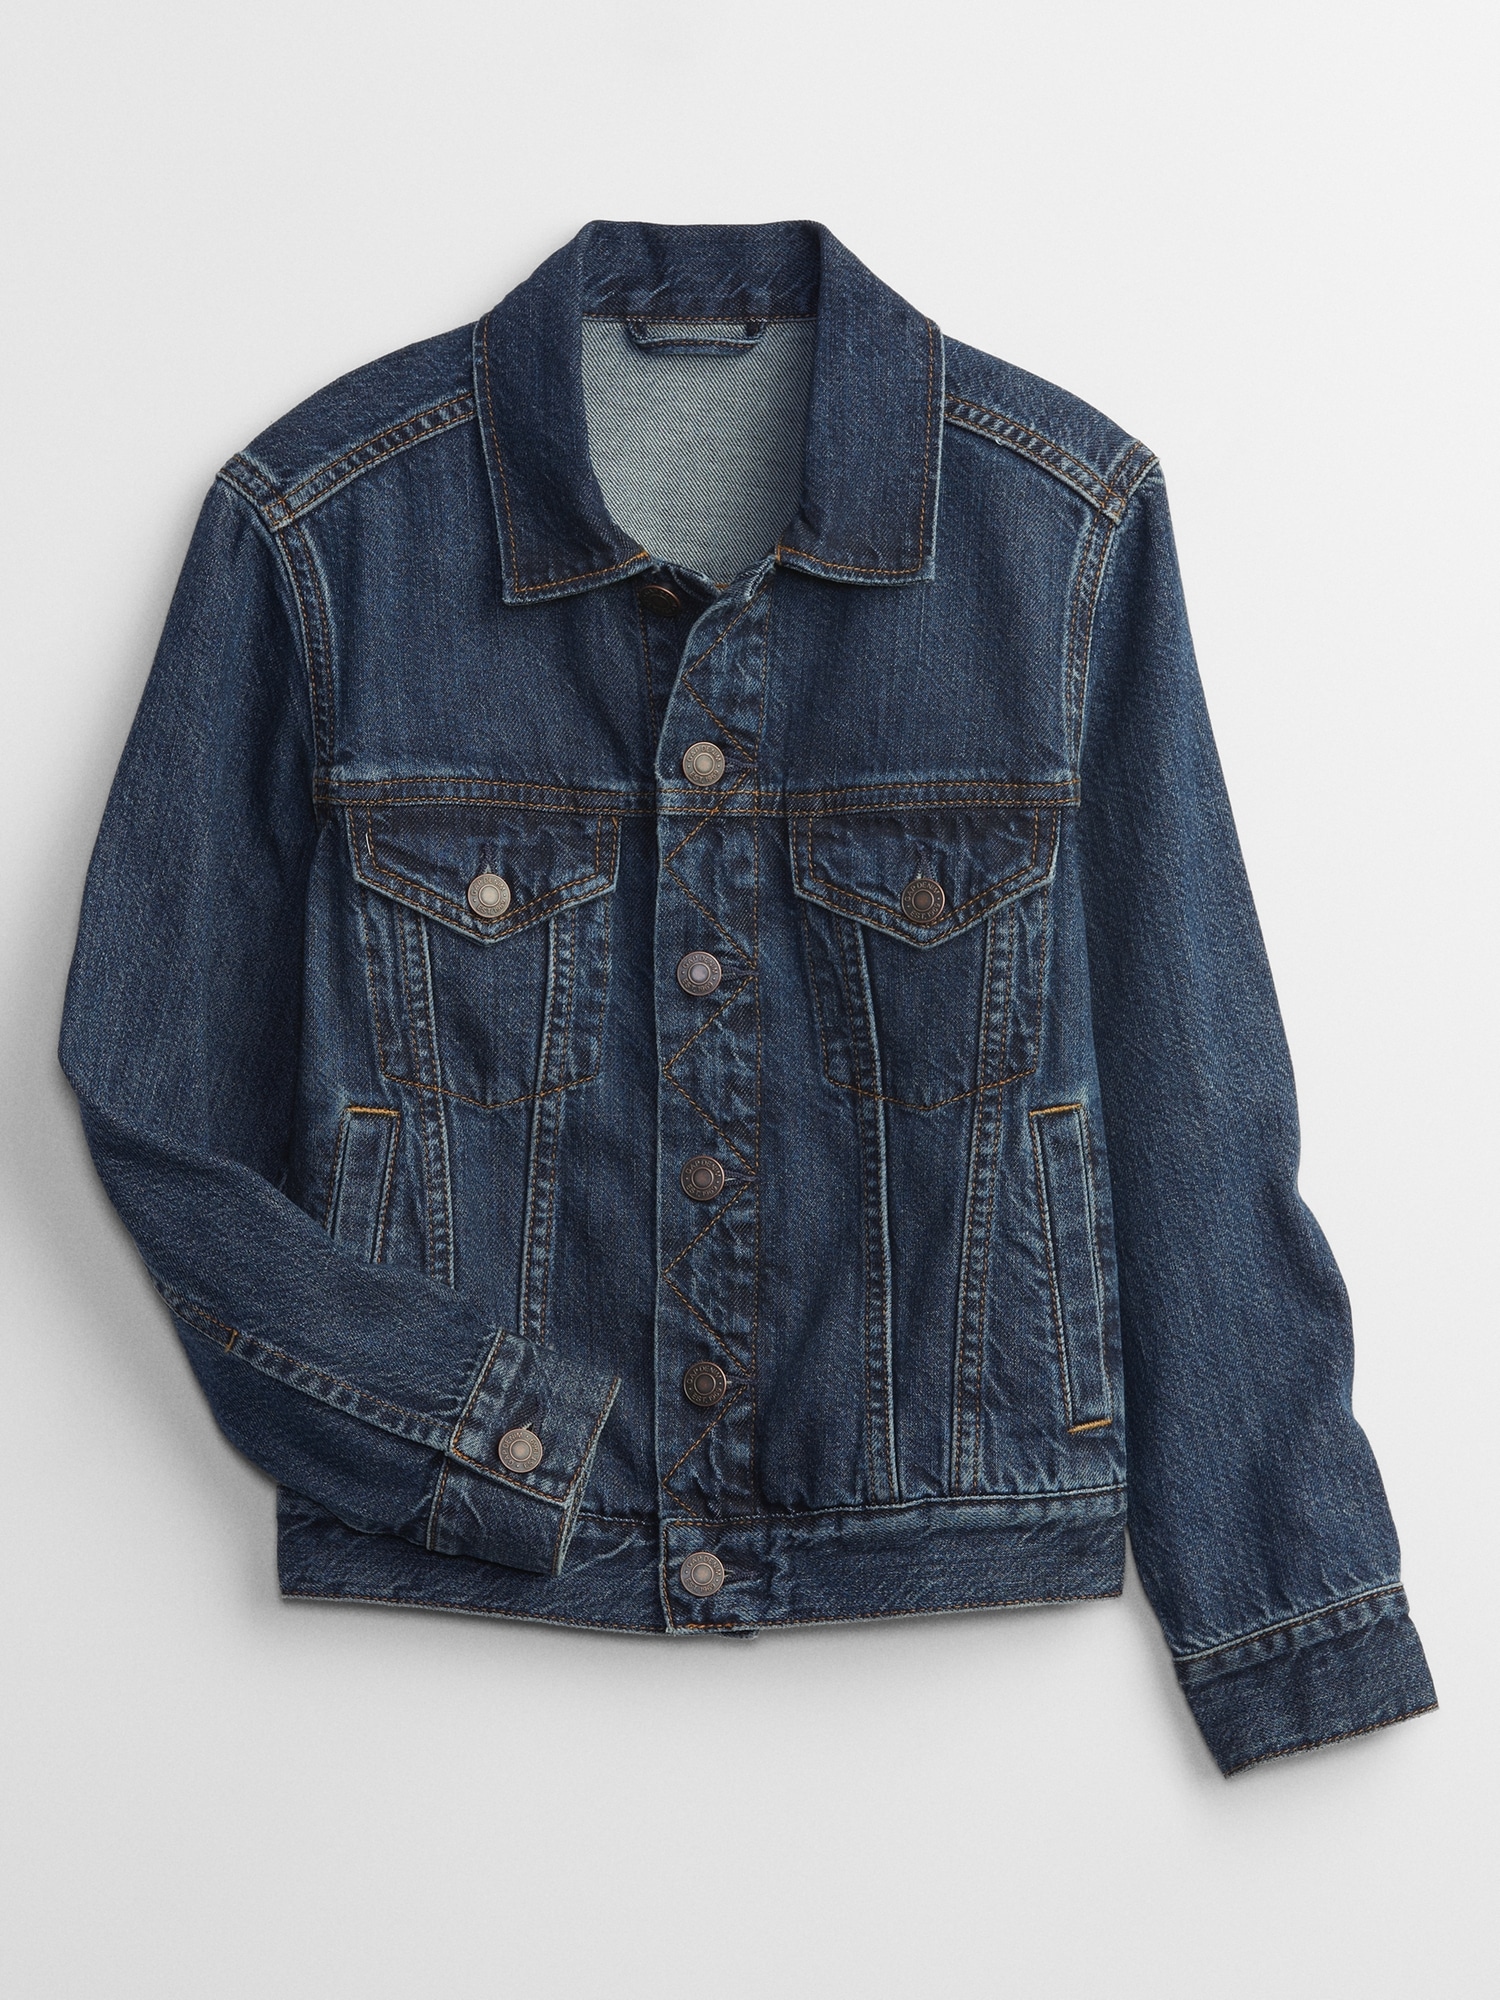 Buy Jean Jackets For Kids Boys Online in India at FirstCry.com-atpcosmetics.com.vn